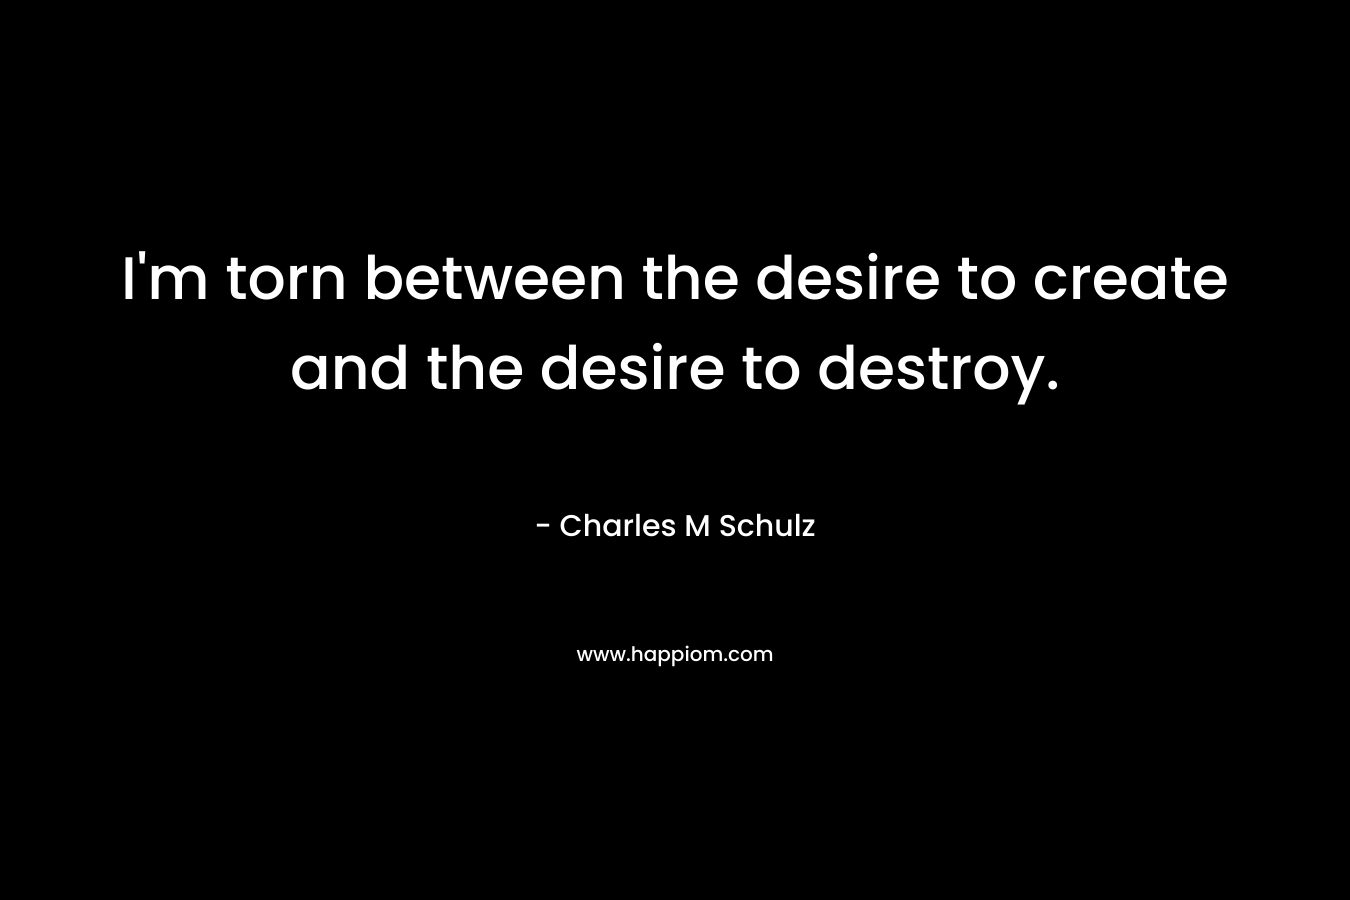 I’m torn between the desire to create and the desire to destroy. – Charles M Schulz